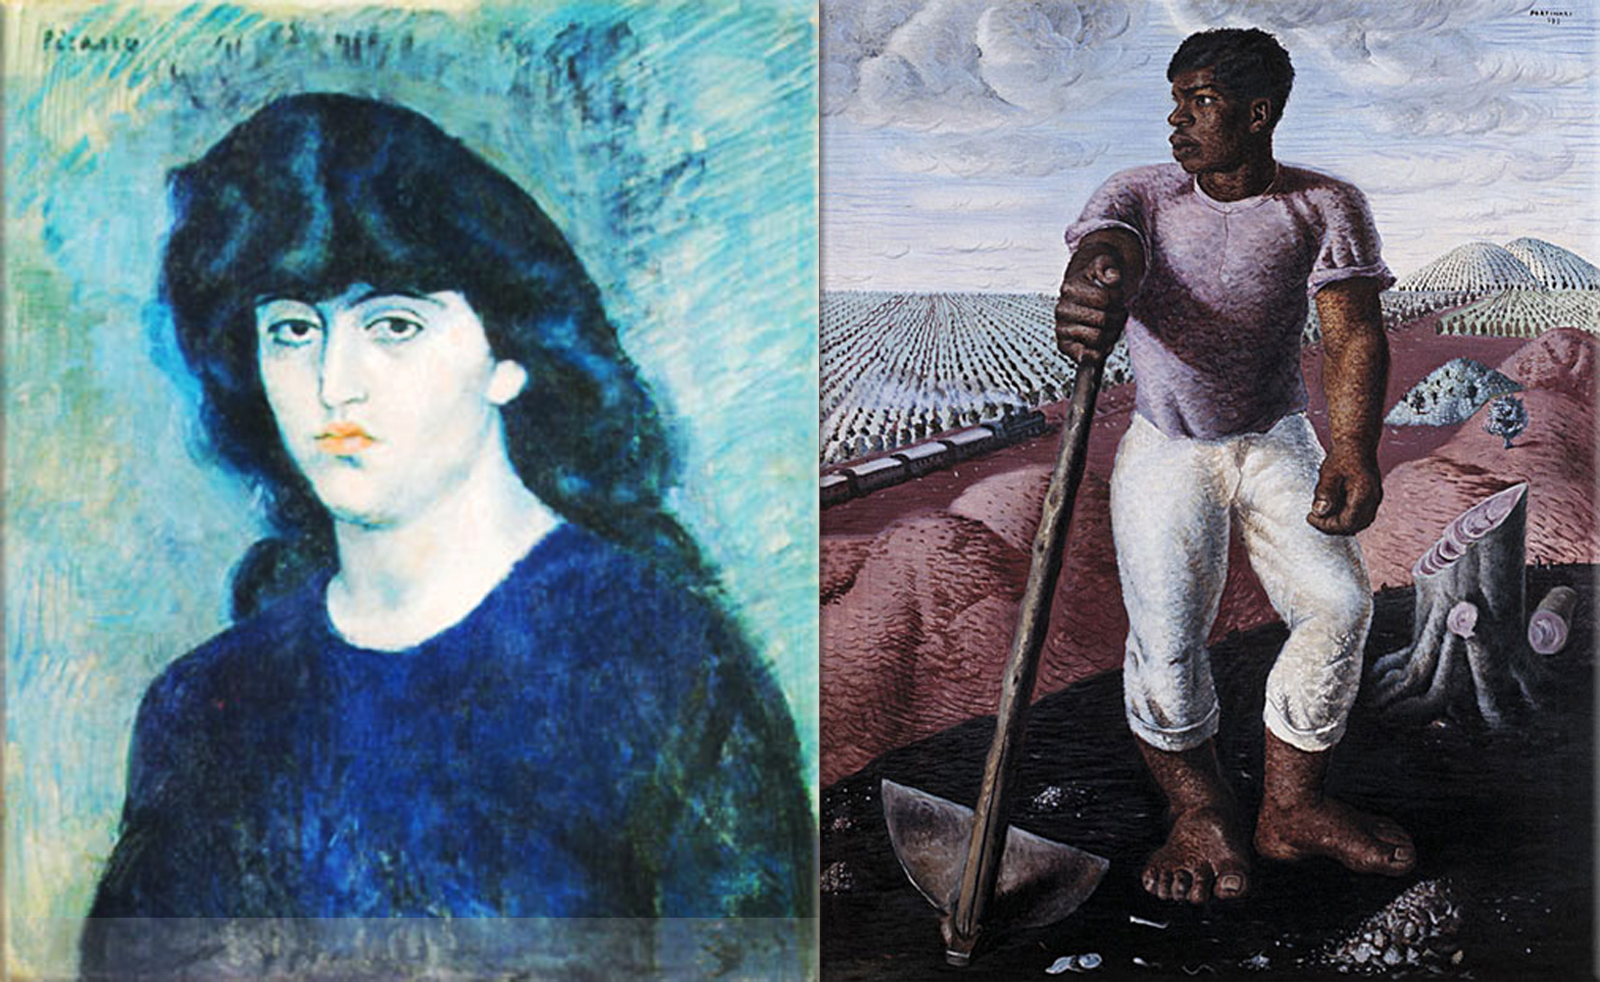 The painting Portrait of Suzanne Bloch (1904), by the Spanish artist Pablo Picasso, is stolen from the São Paulo Museum of Art, along with O Lavrador de Café (The Coffee Worker, 1939) by the major Brazilian modernist painter Candido Portinari